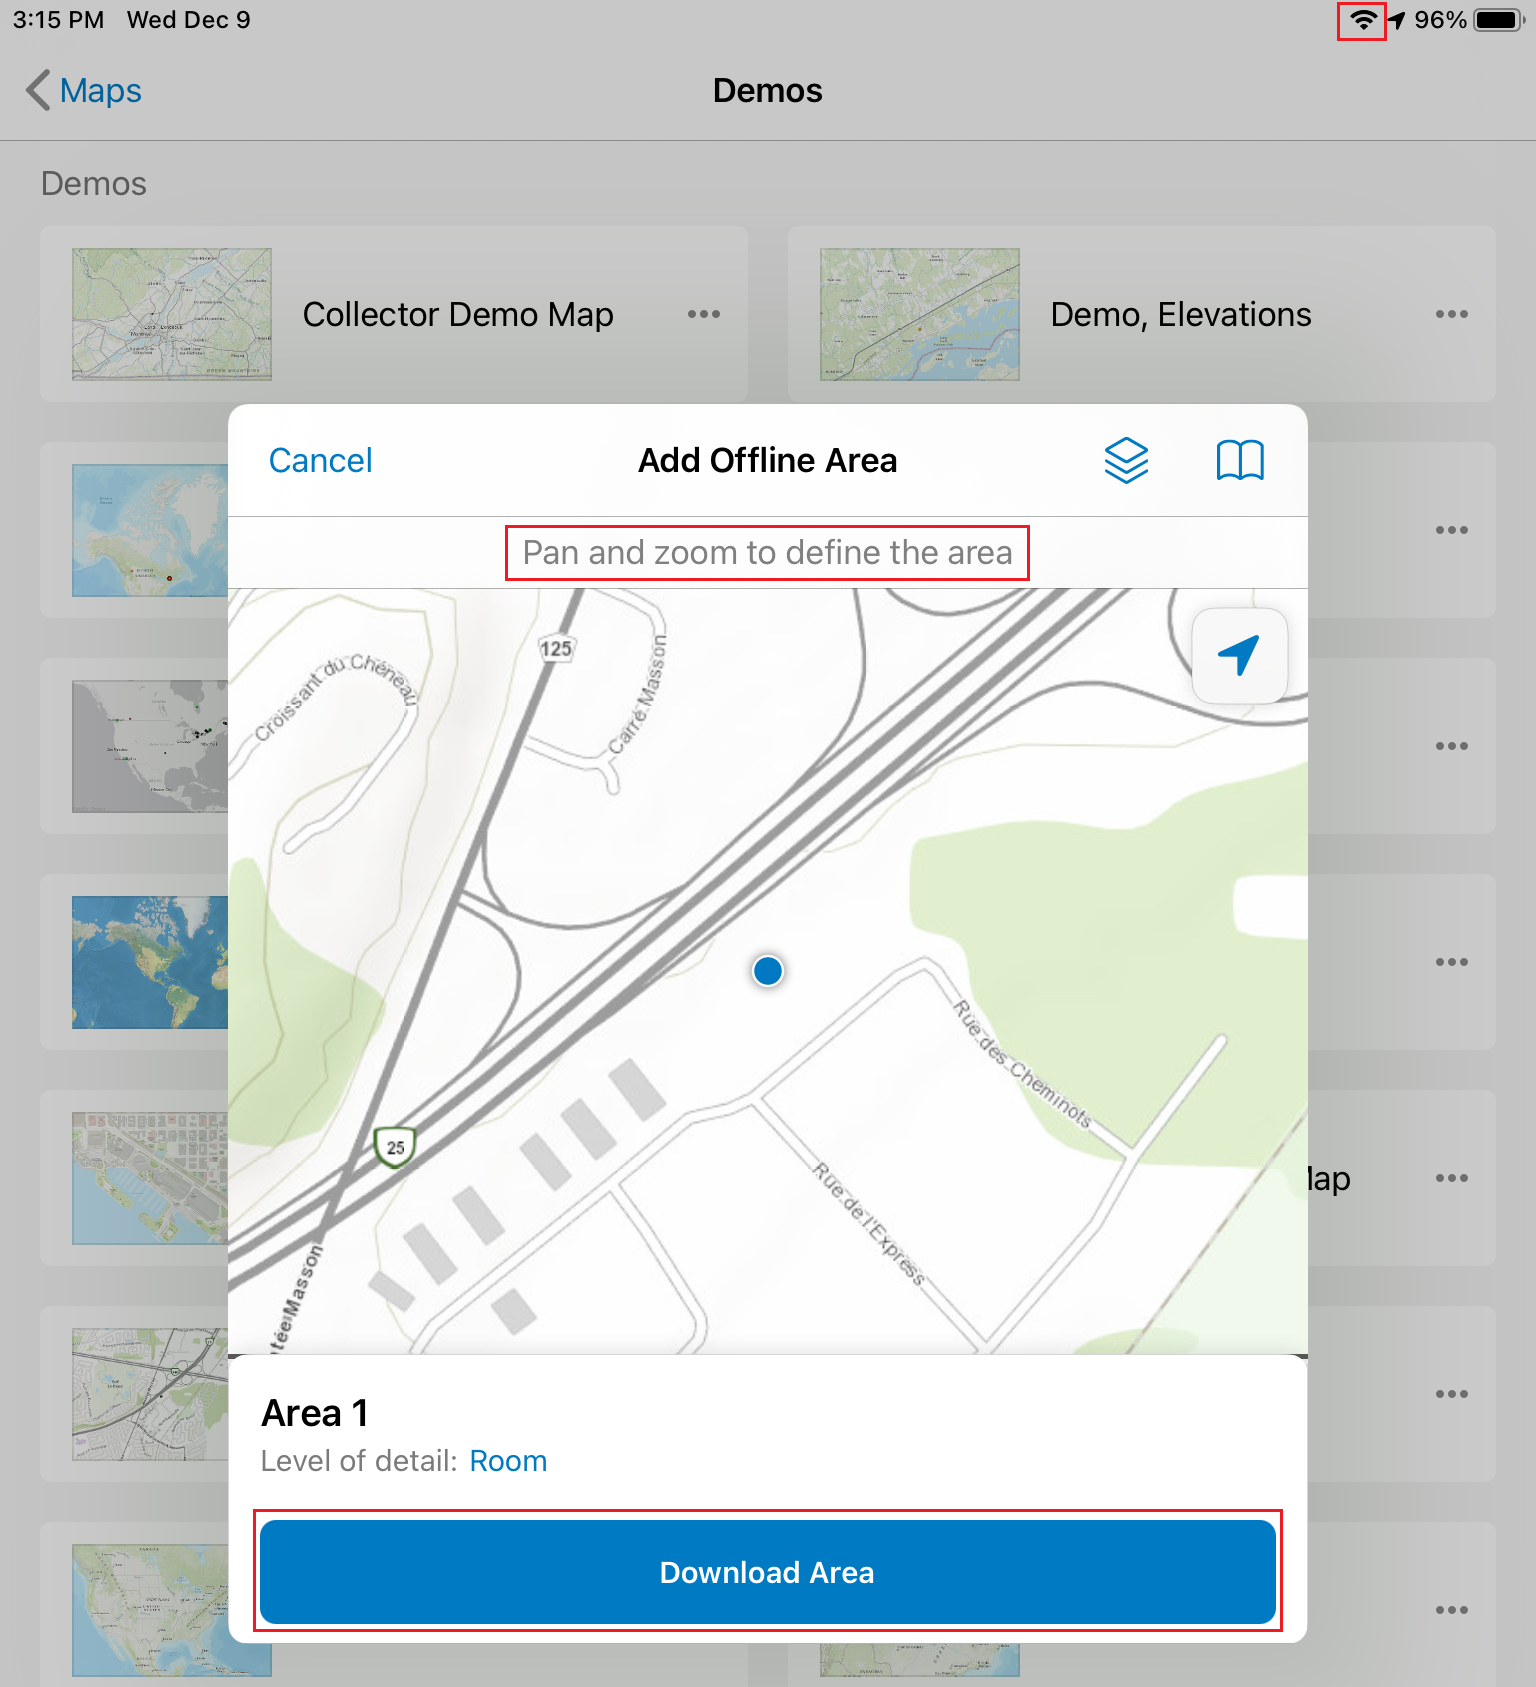 Collector offline screenshot 2.1 Pan and zoom to define your area where you will perform field work on this outing.